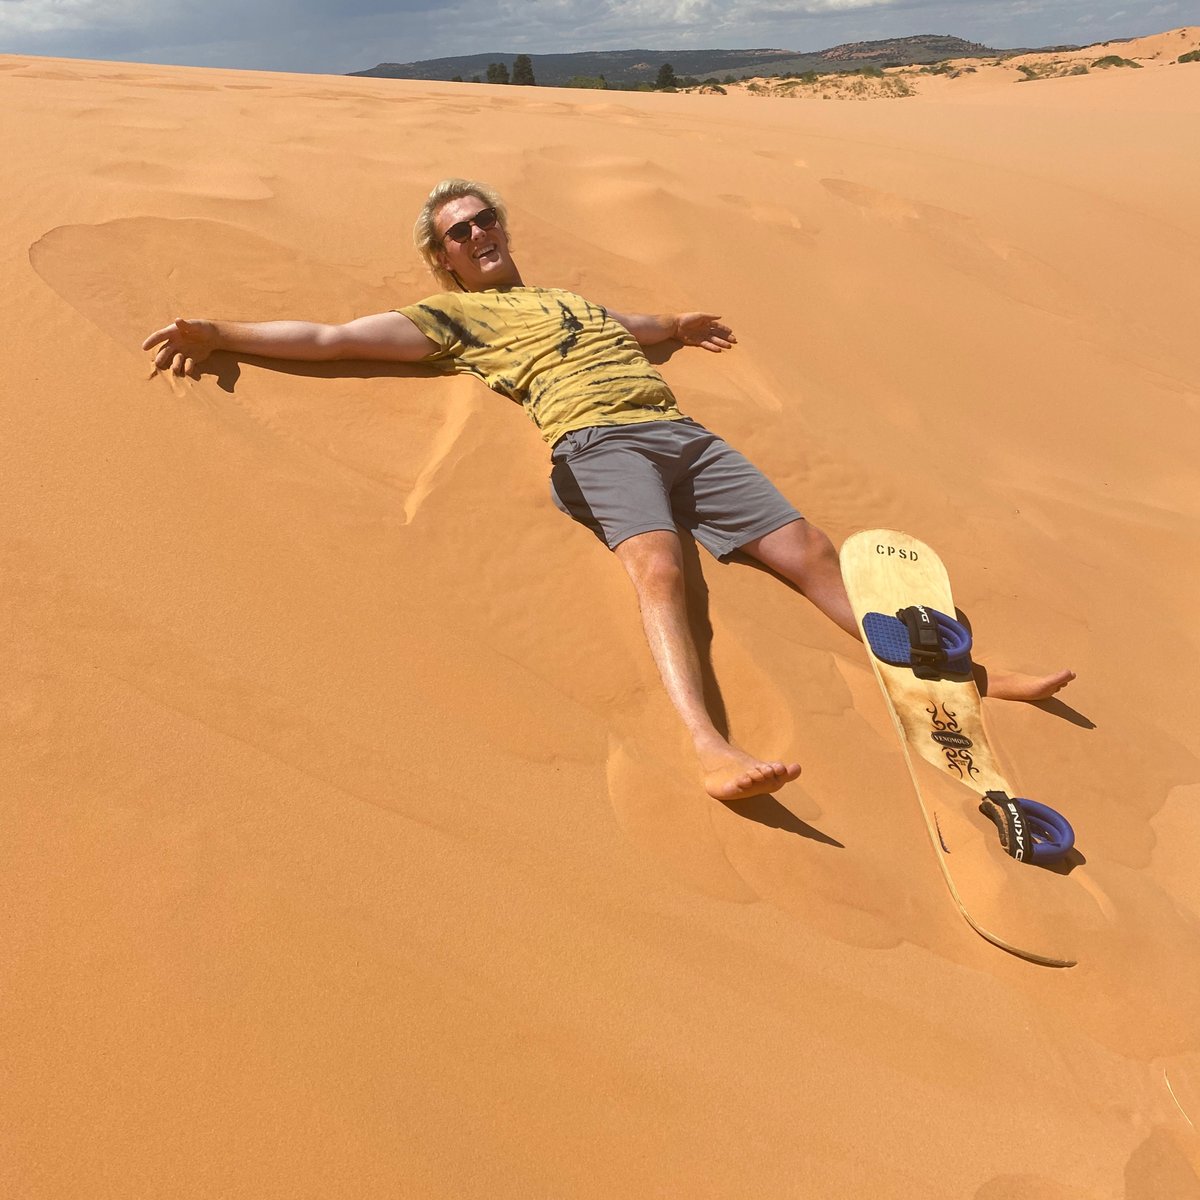 The sand dunes was a workout…young at heart!!

#motorhome 
#ltn
#livetomorrownow
#classa
#rvlife
#hike
#epic
#besthikes
#roadtrips
#rvamerica
#surprised
#hikeviews
#unexpected
#epicmemories
#explore
#nature
#explore
#travelmore
#instatravel
#greatoutdoors
#memories
#natural